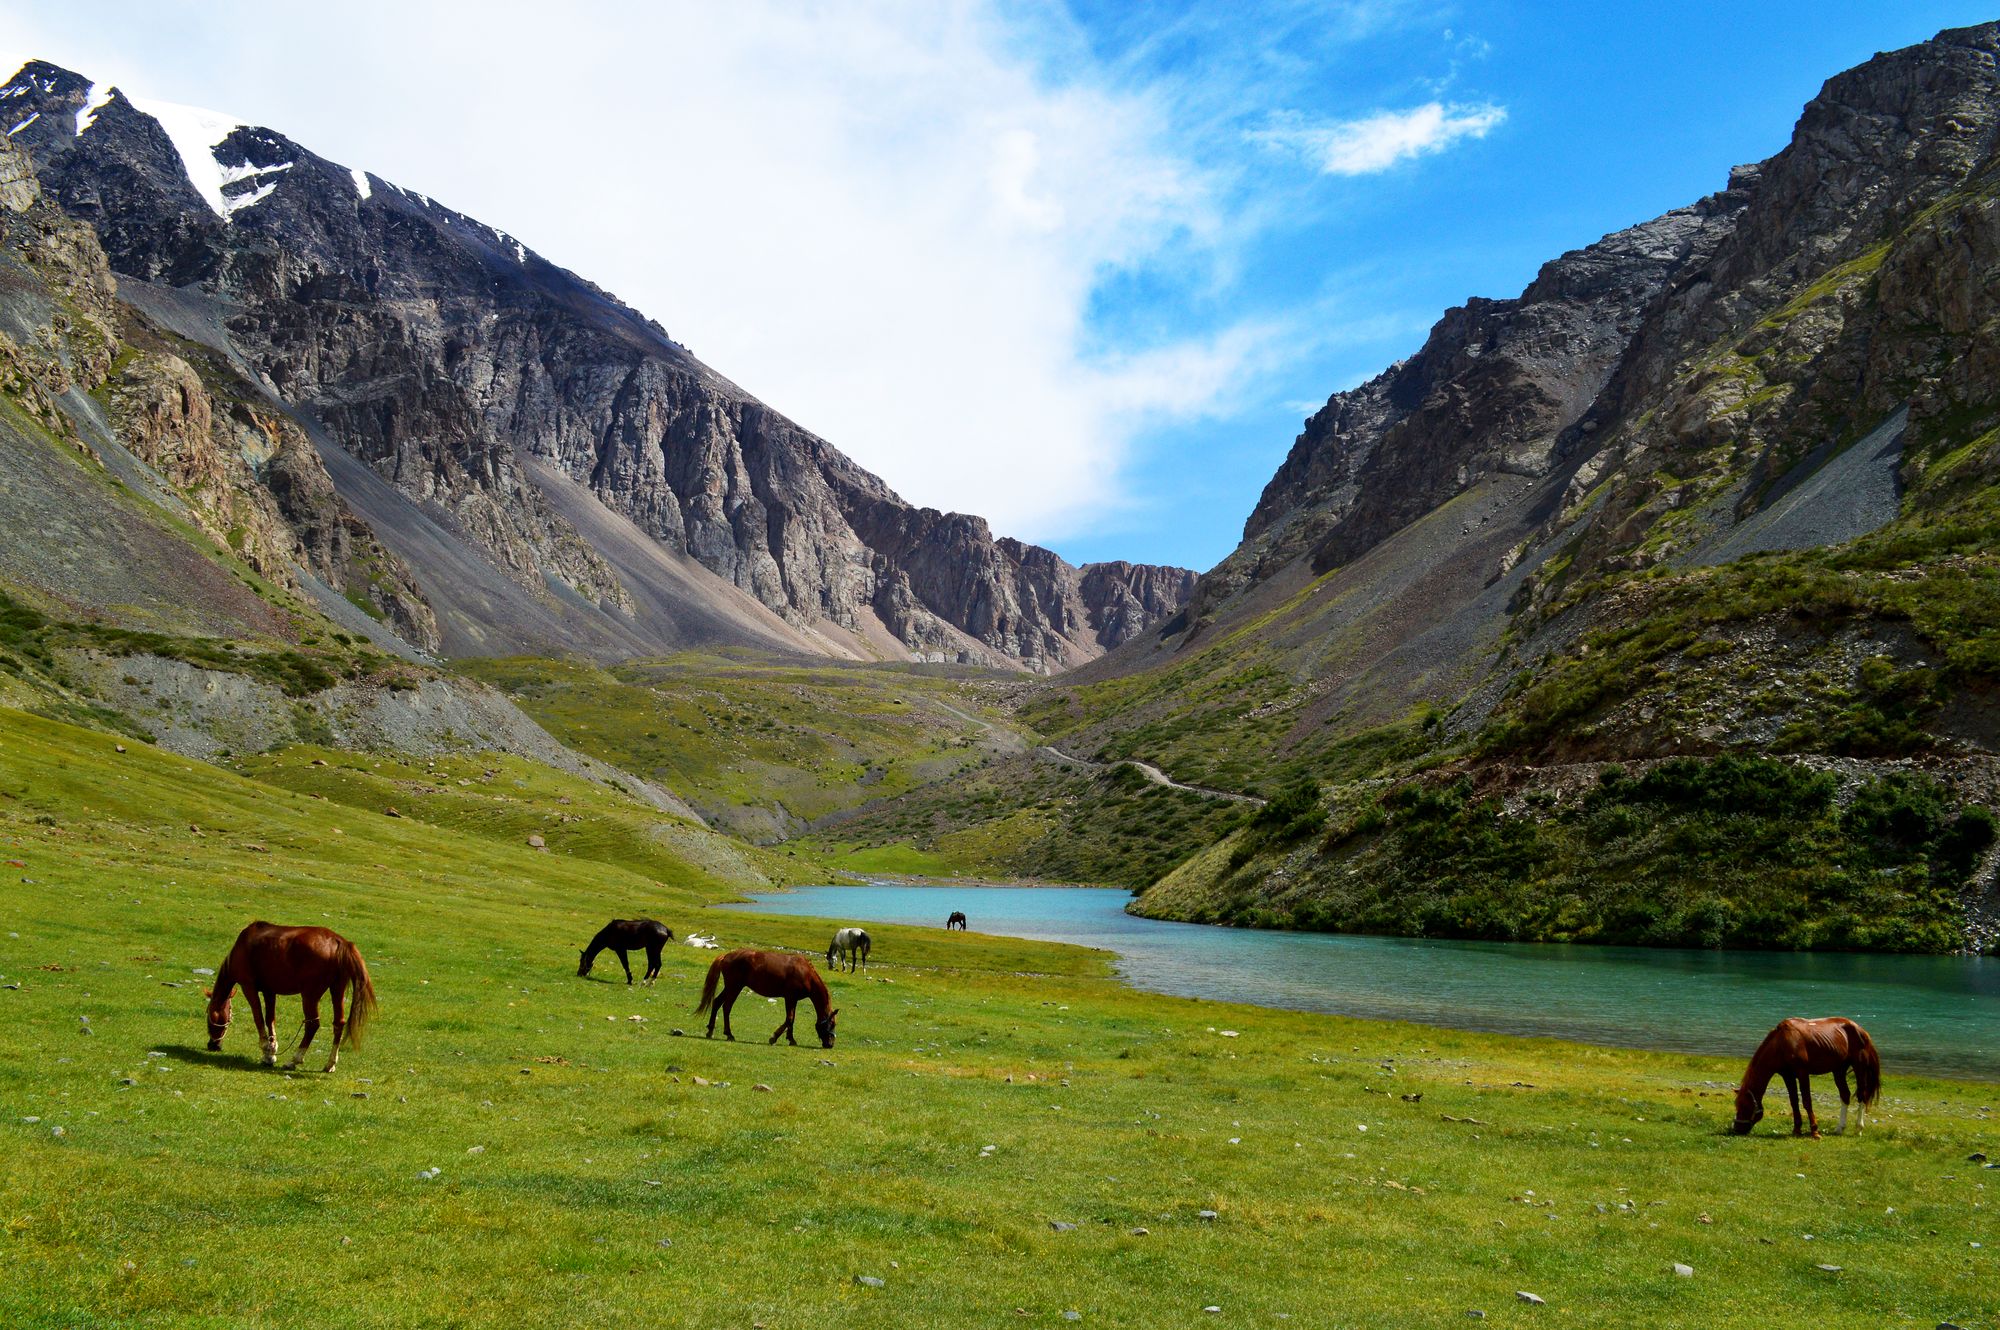 Horses by the river, backed by snow-capped mountains, in Kyrgyzstan.